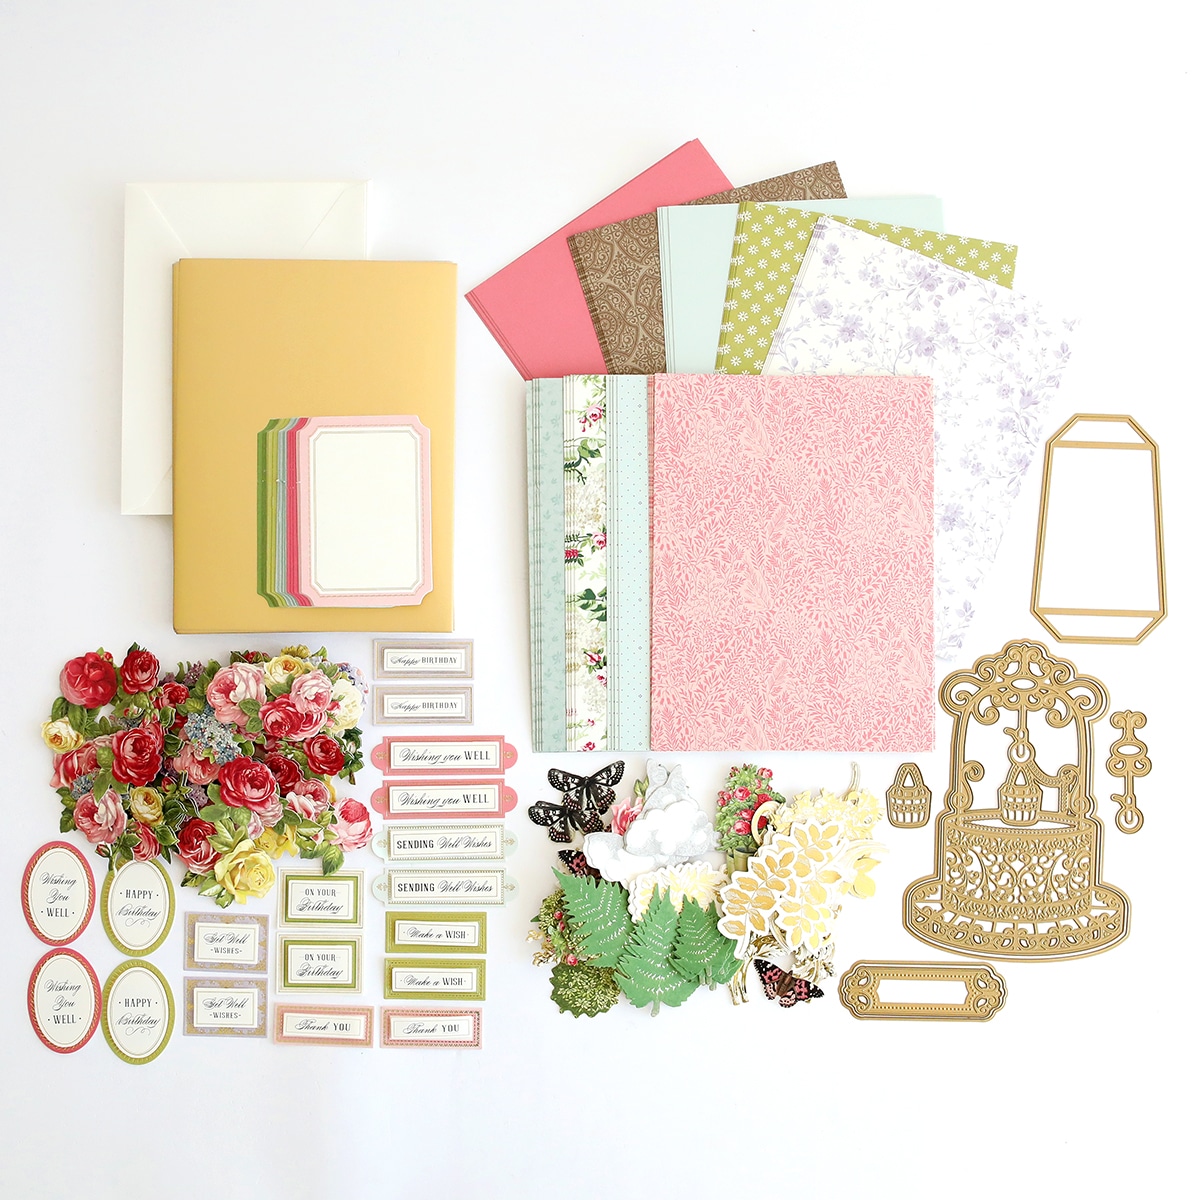 A collection of scrapbooking supplies, including cards and paper.